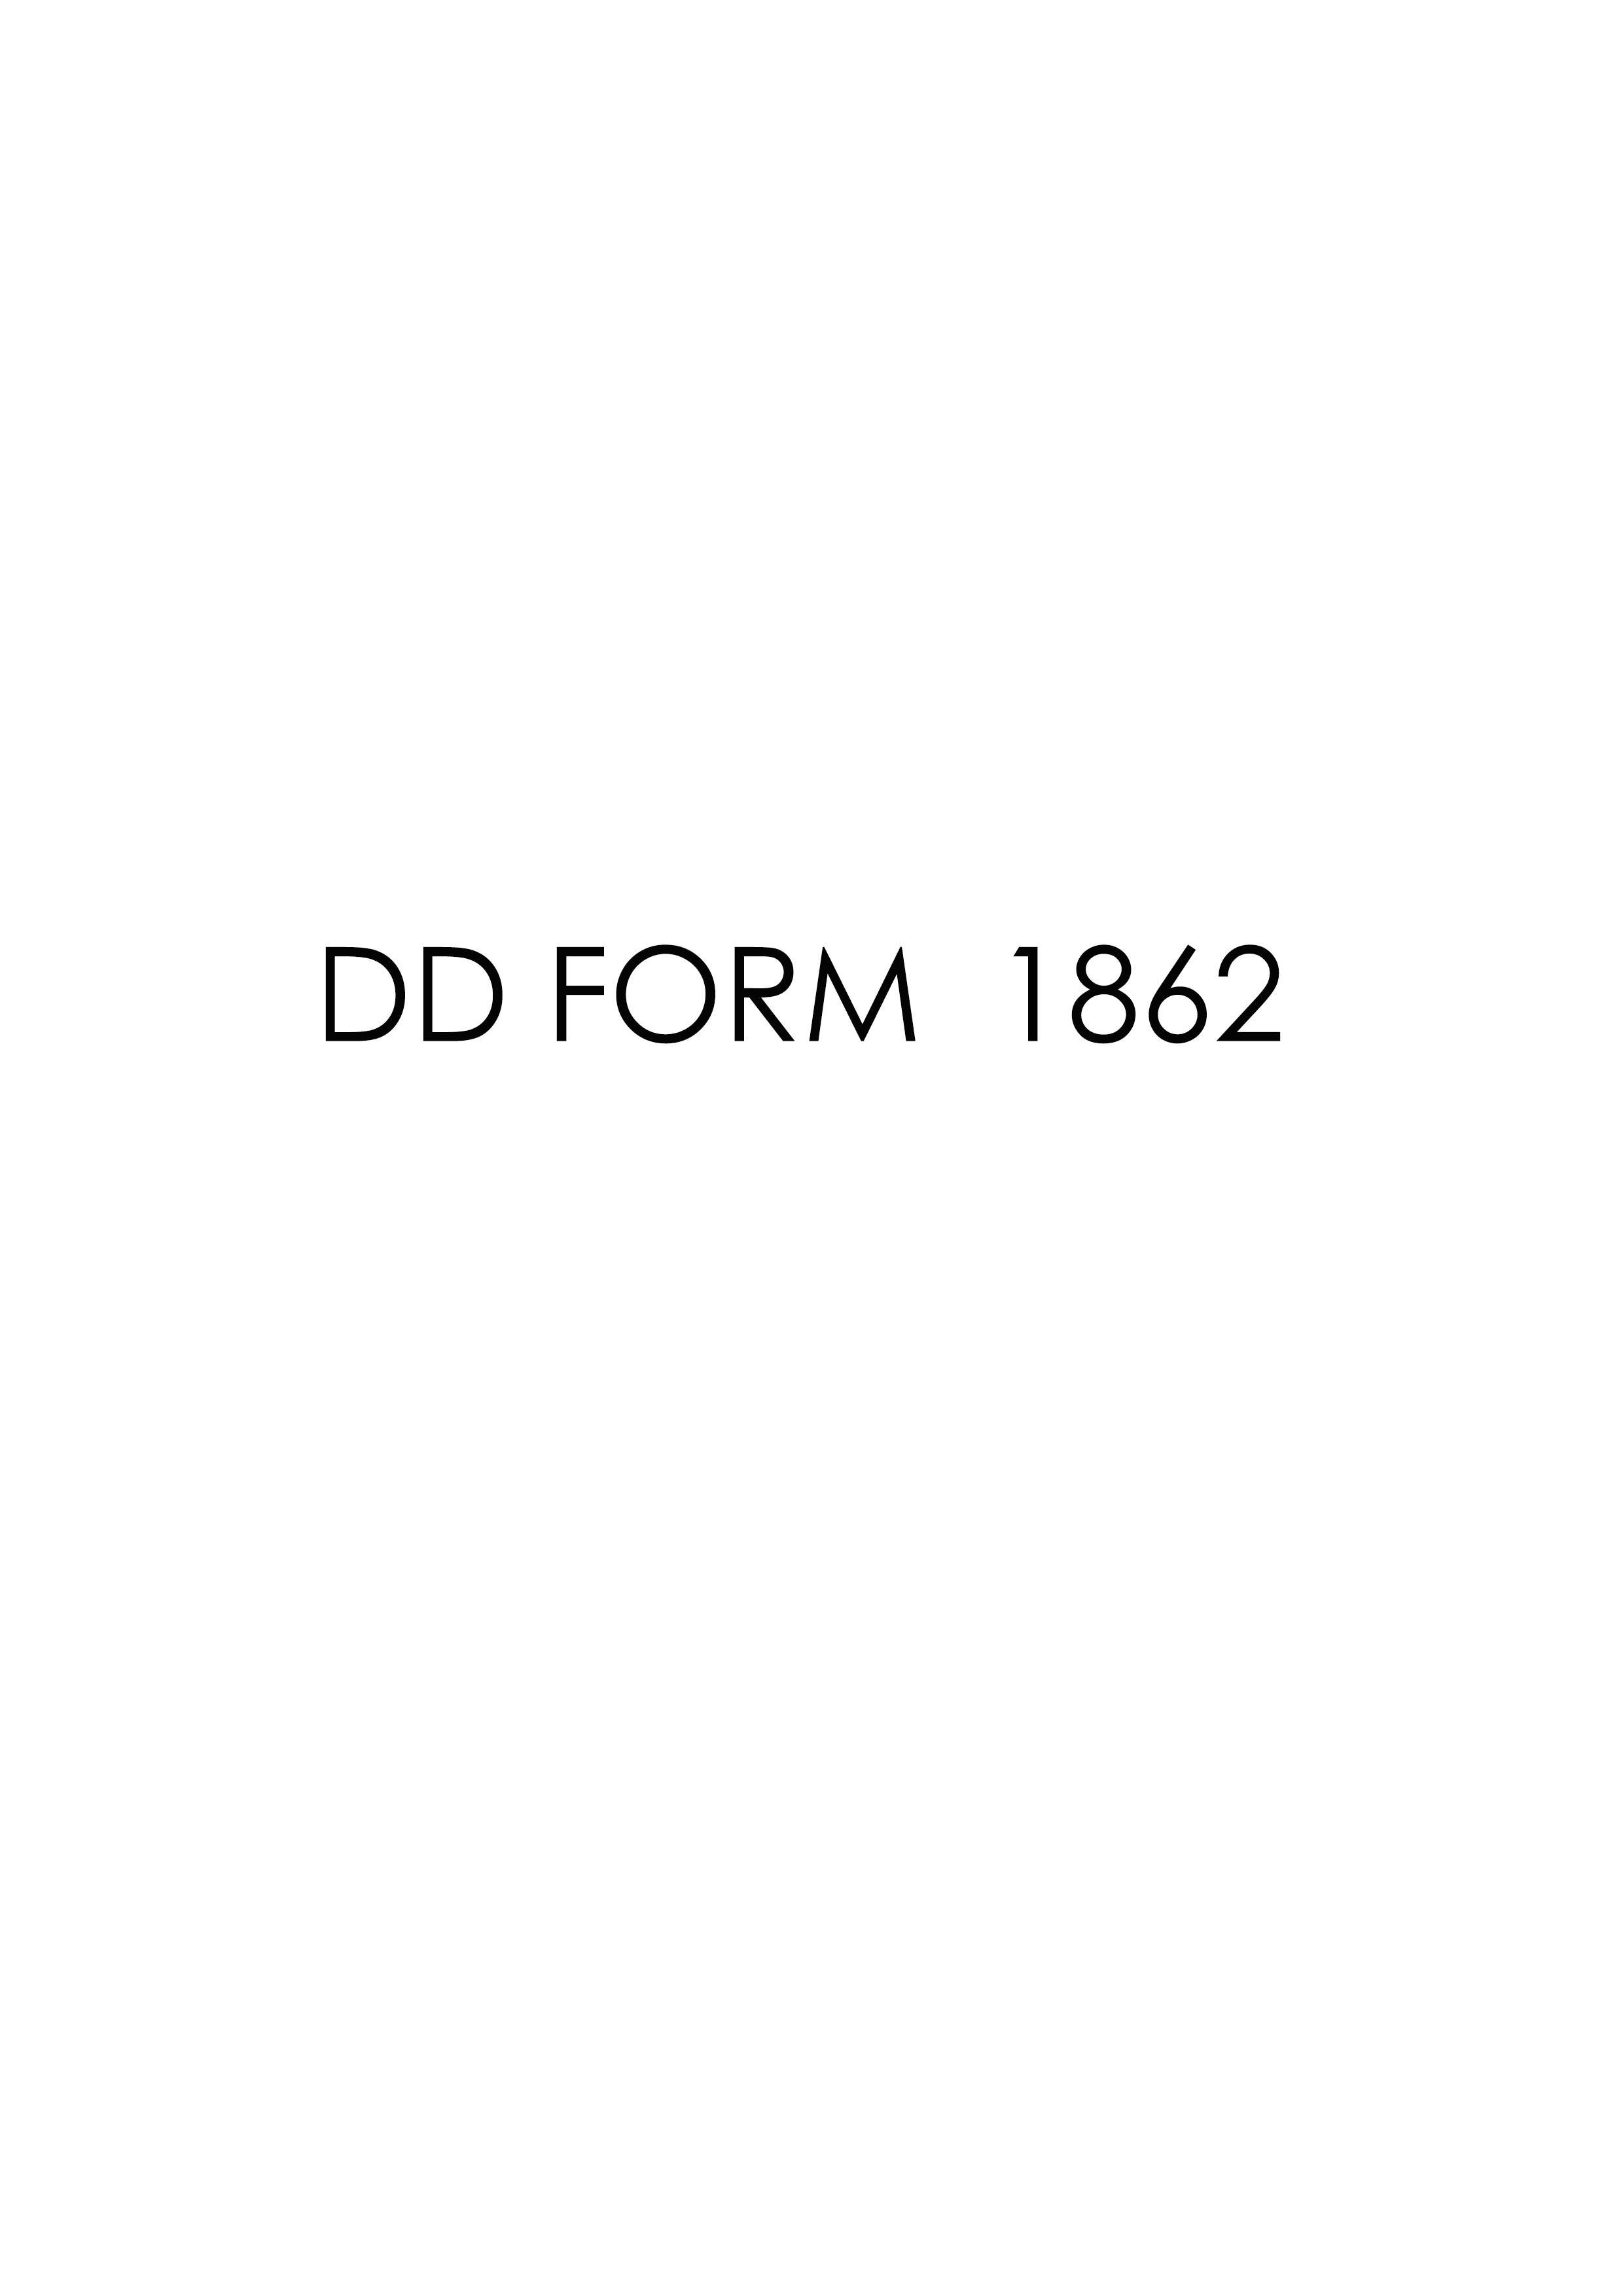 Download Fillable dd Form 1862